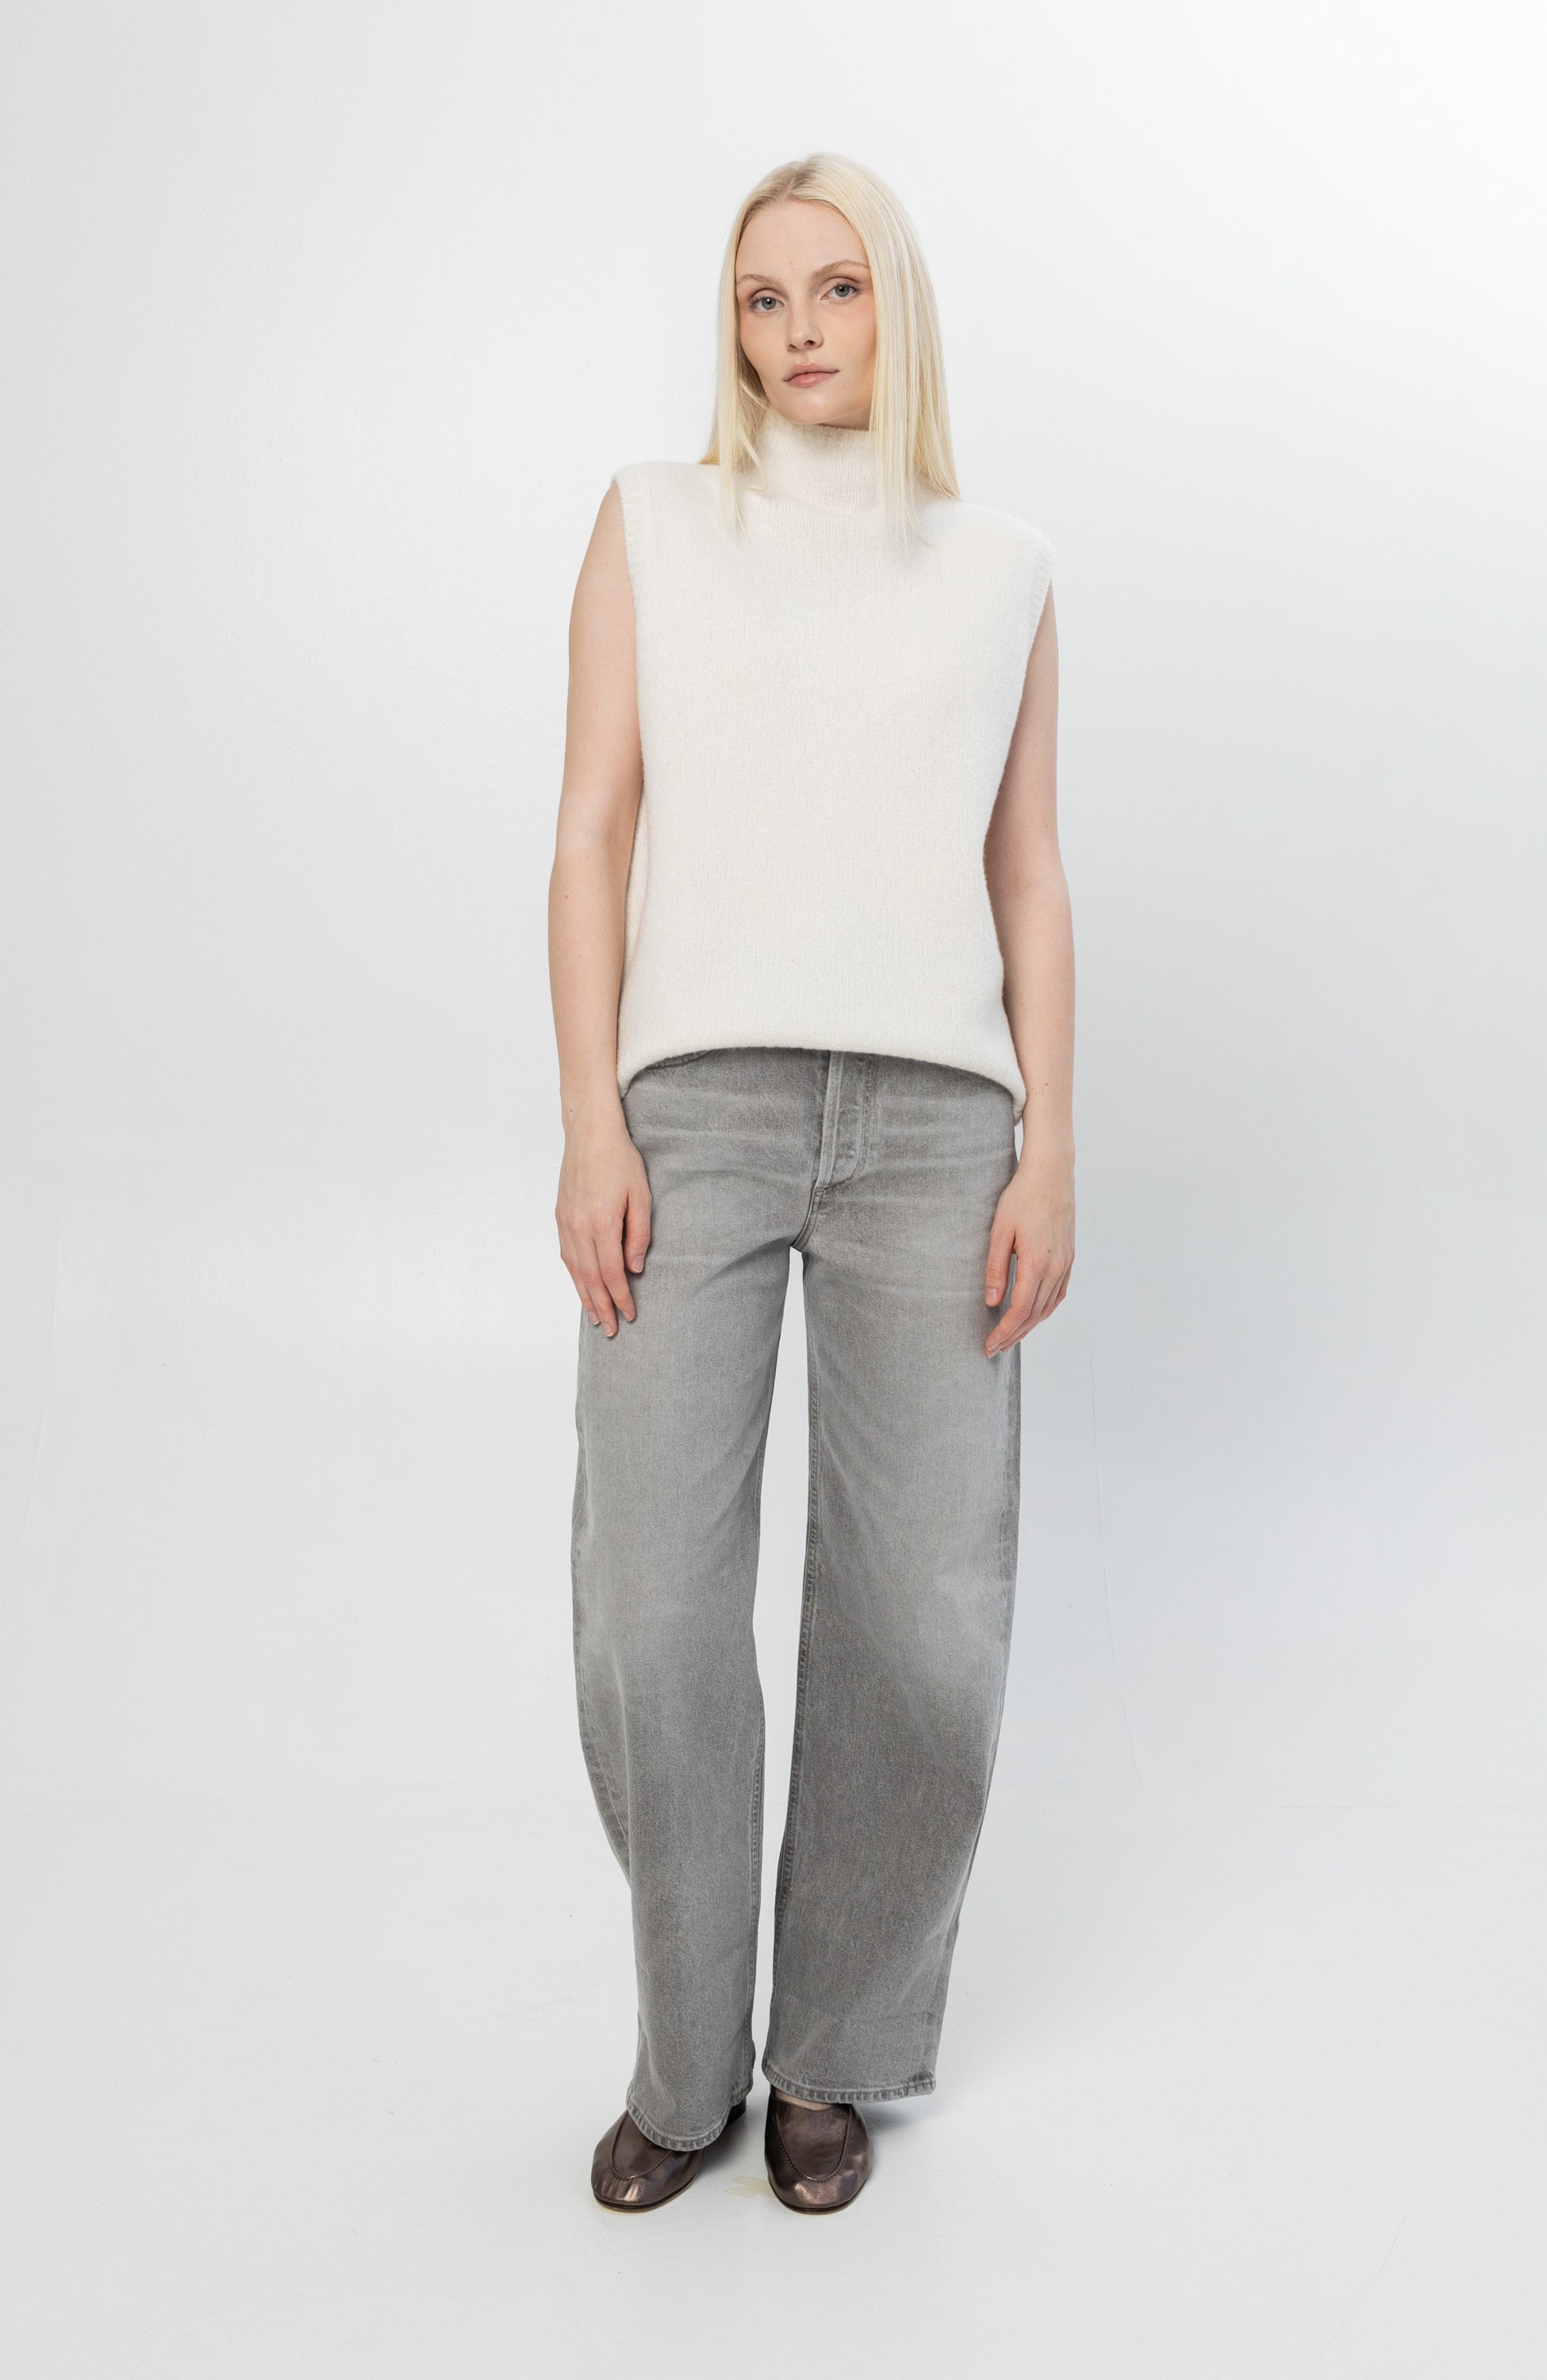 Citizens of humanity Grey Relaxed baggy jeans ayla image 2